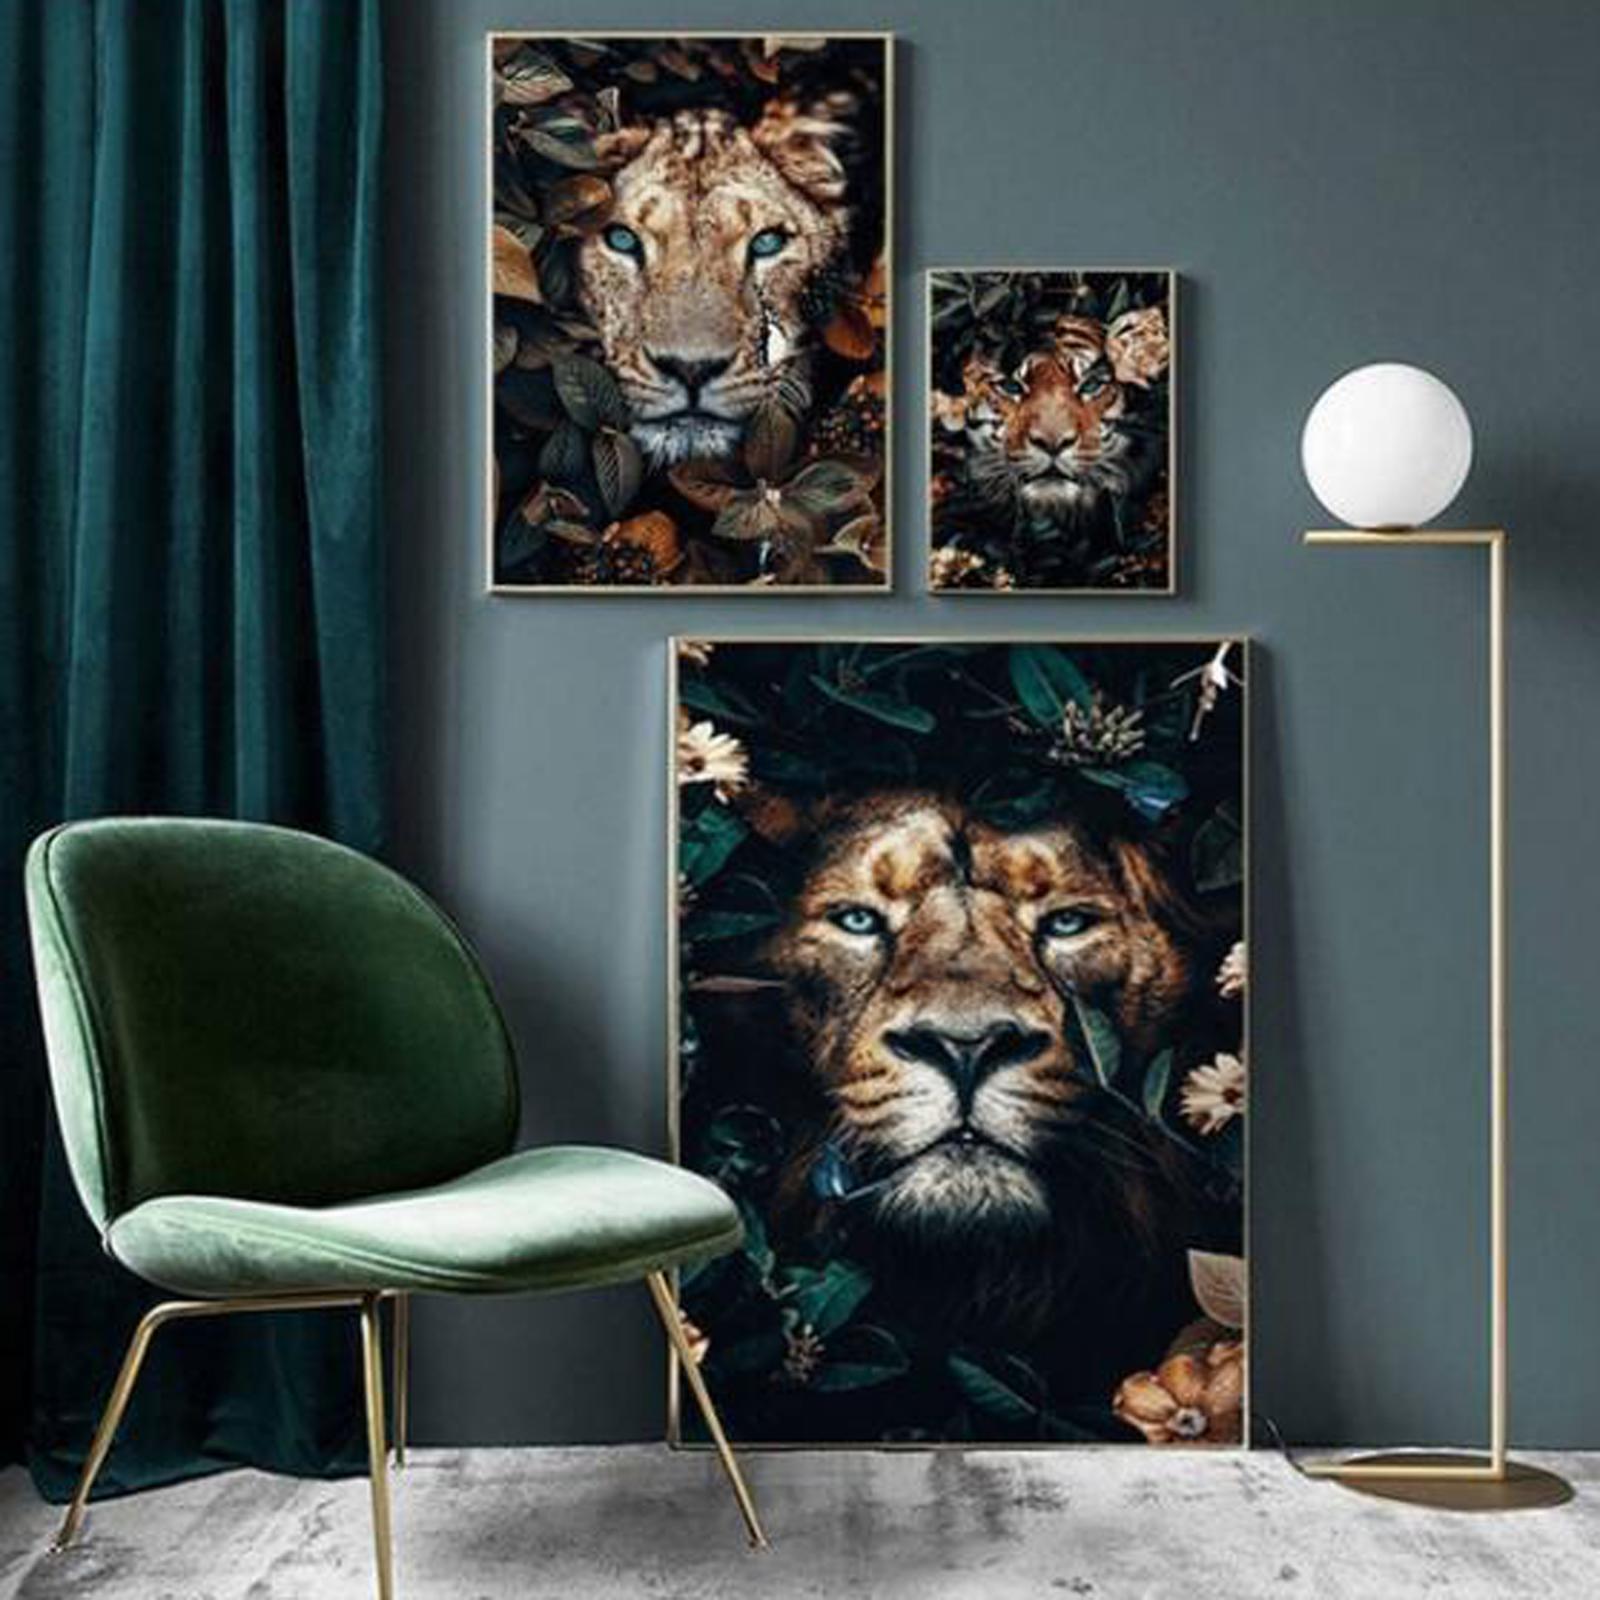 Painting DIY Paint Tiger Oil Painting Artwork Home Office Decor